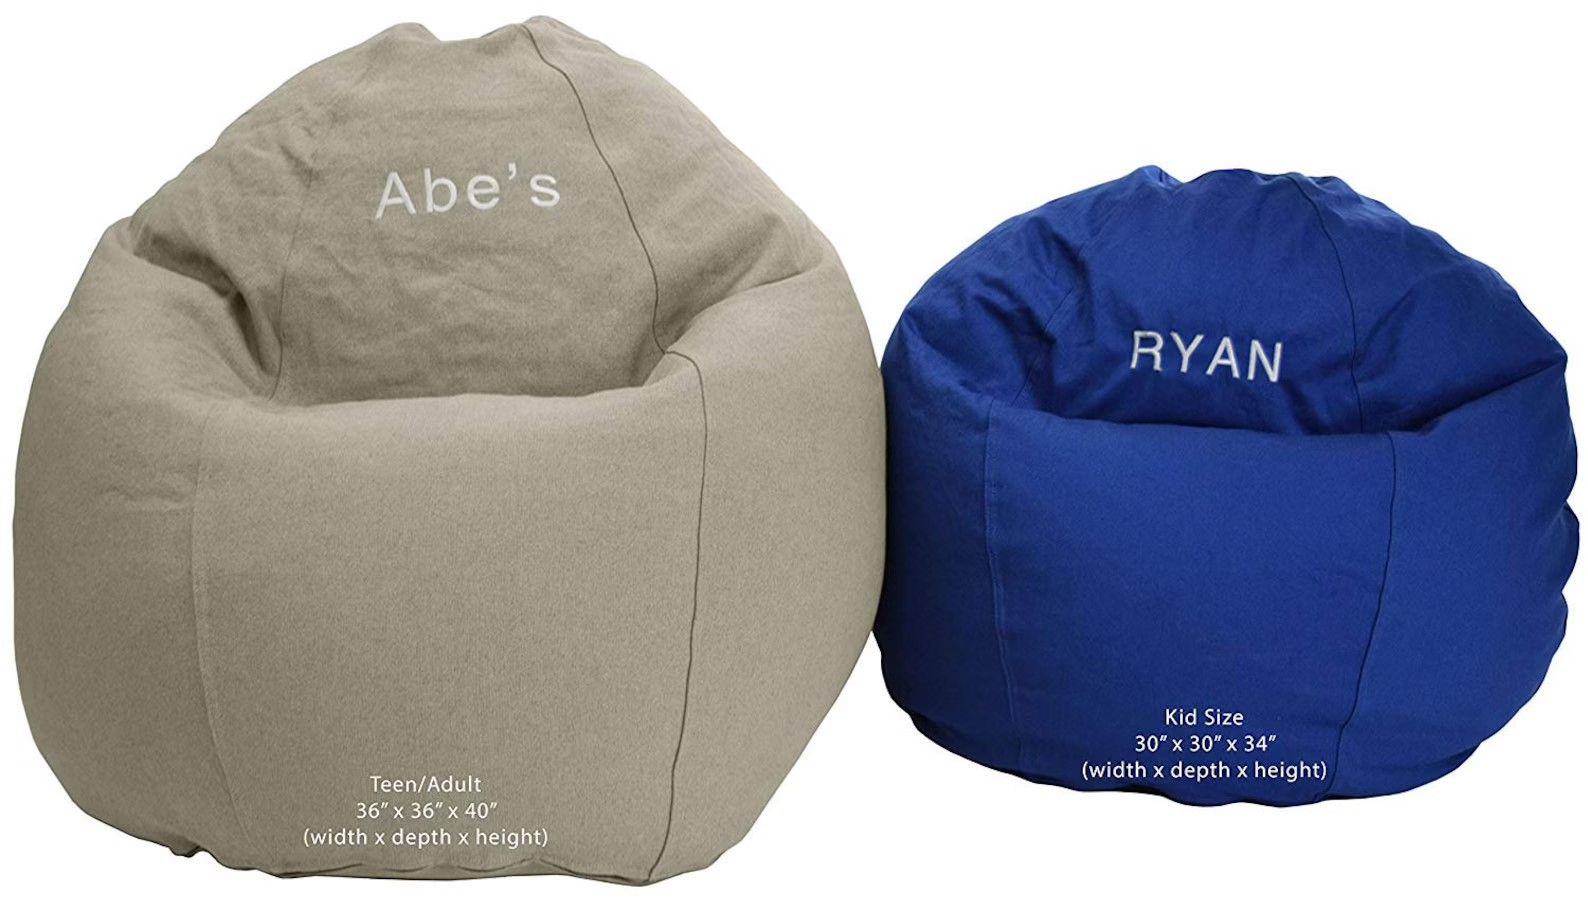 two sized of beanbags embroidered with names